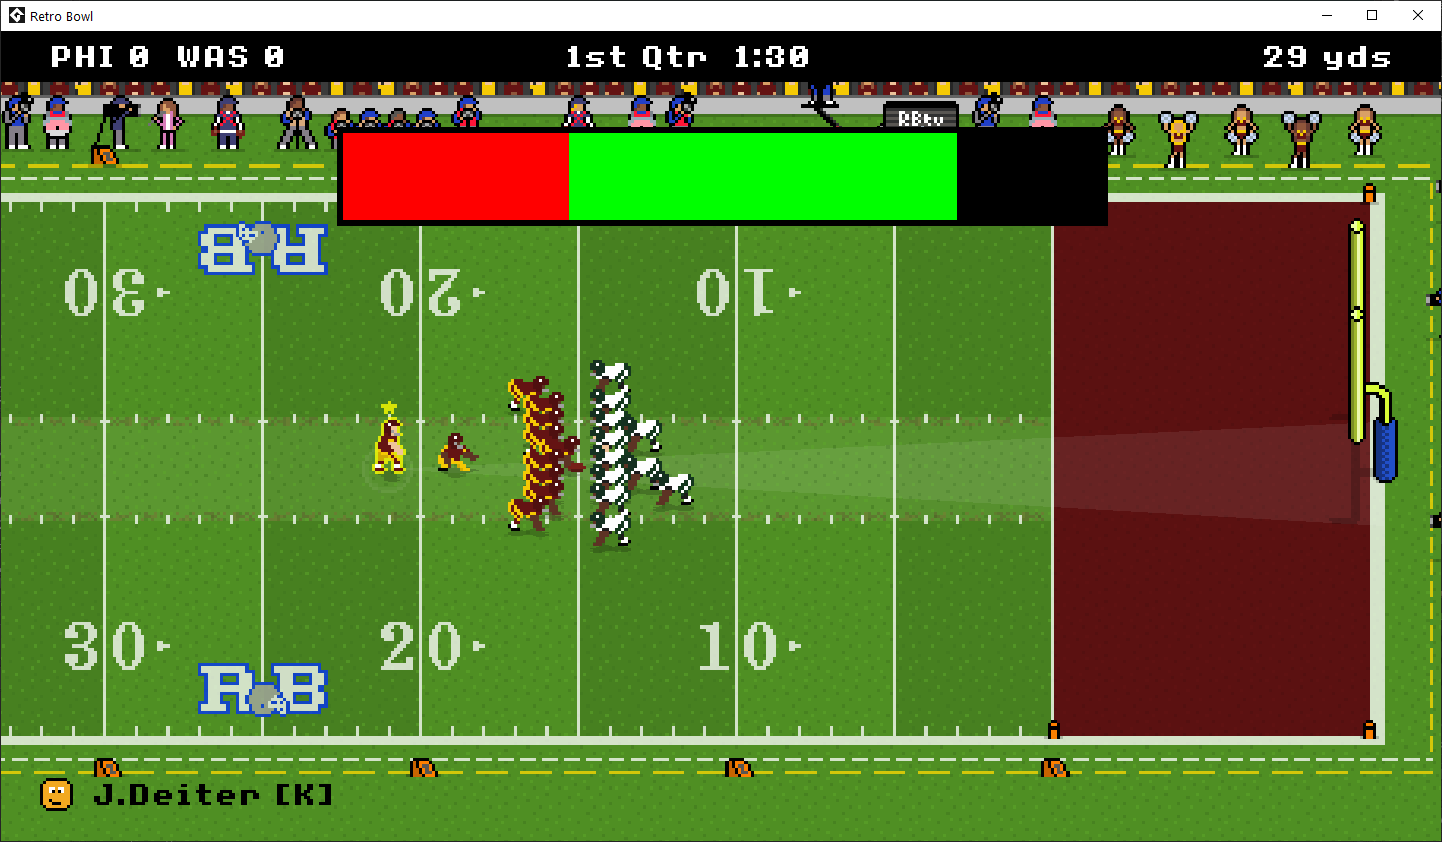 Retro Bowl Update Adjusts Running Physics, Improves AI, Adds End Zone Colors, More Awards and Much More